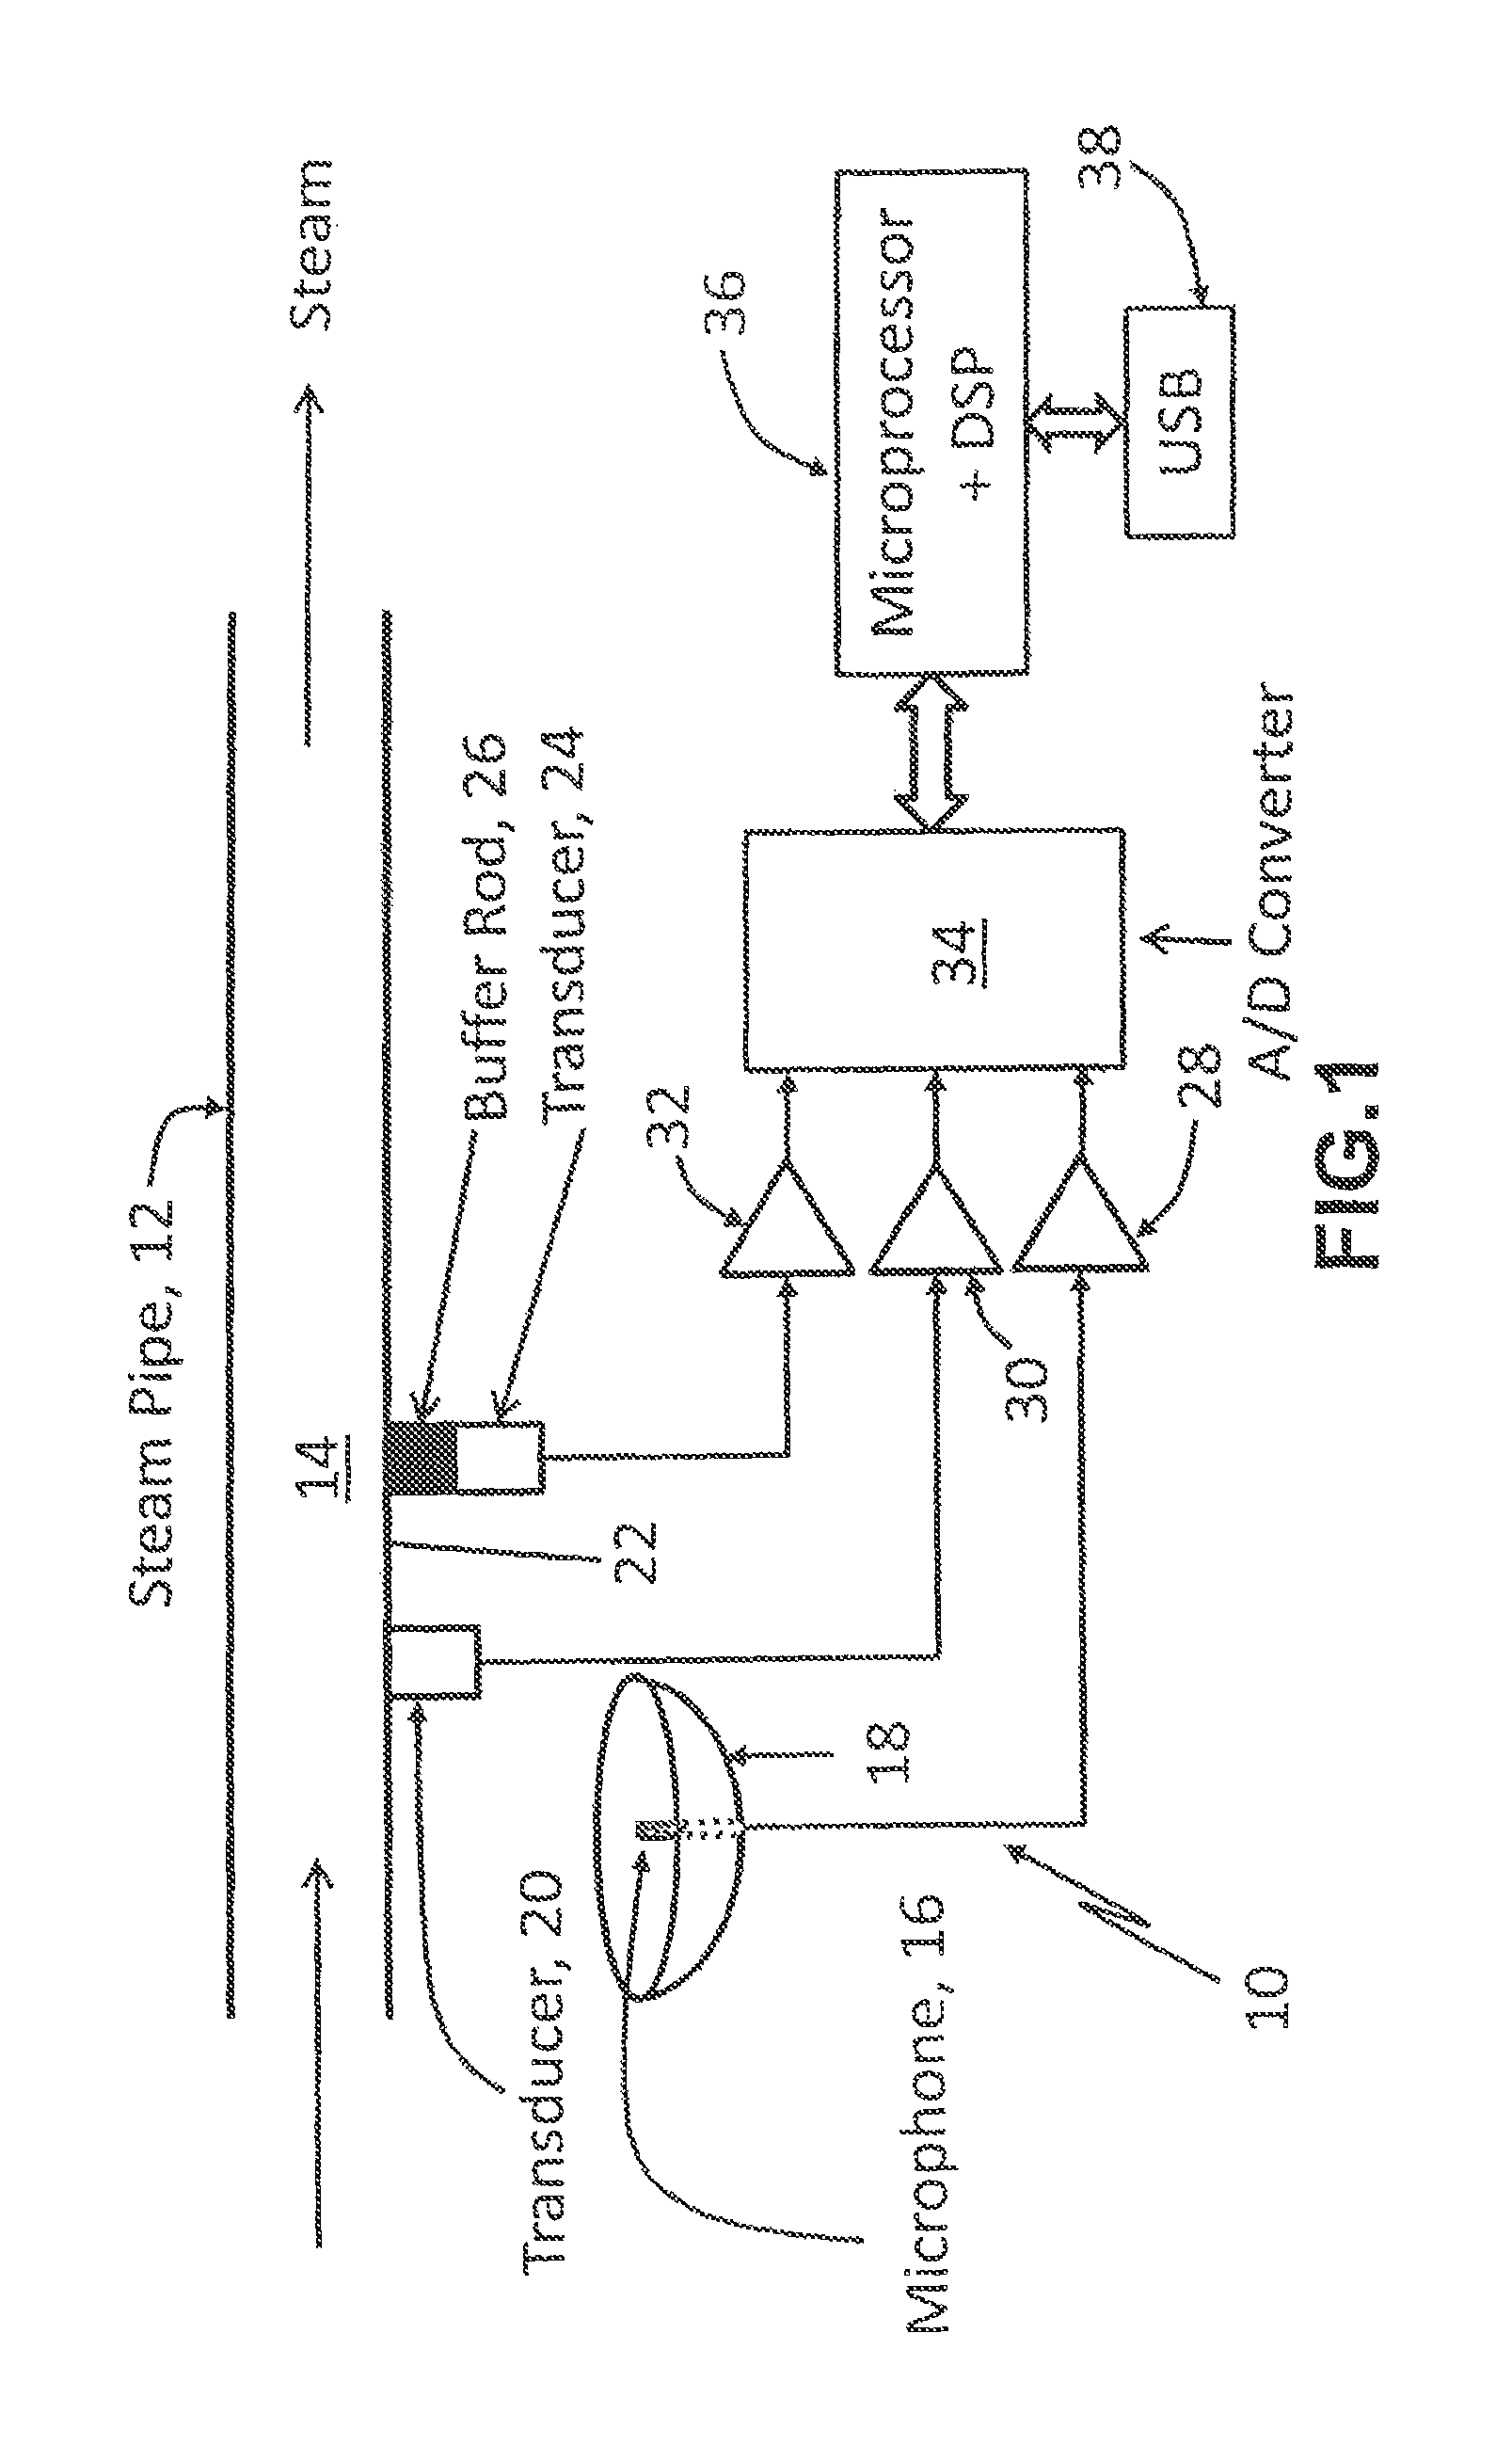 Apparatus and method for acoustic monitoring of steam quality and flow